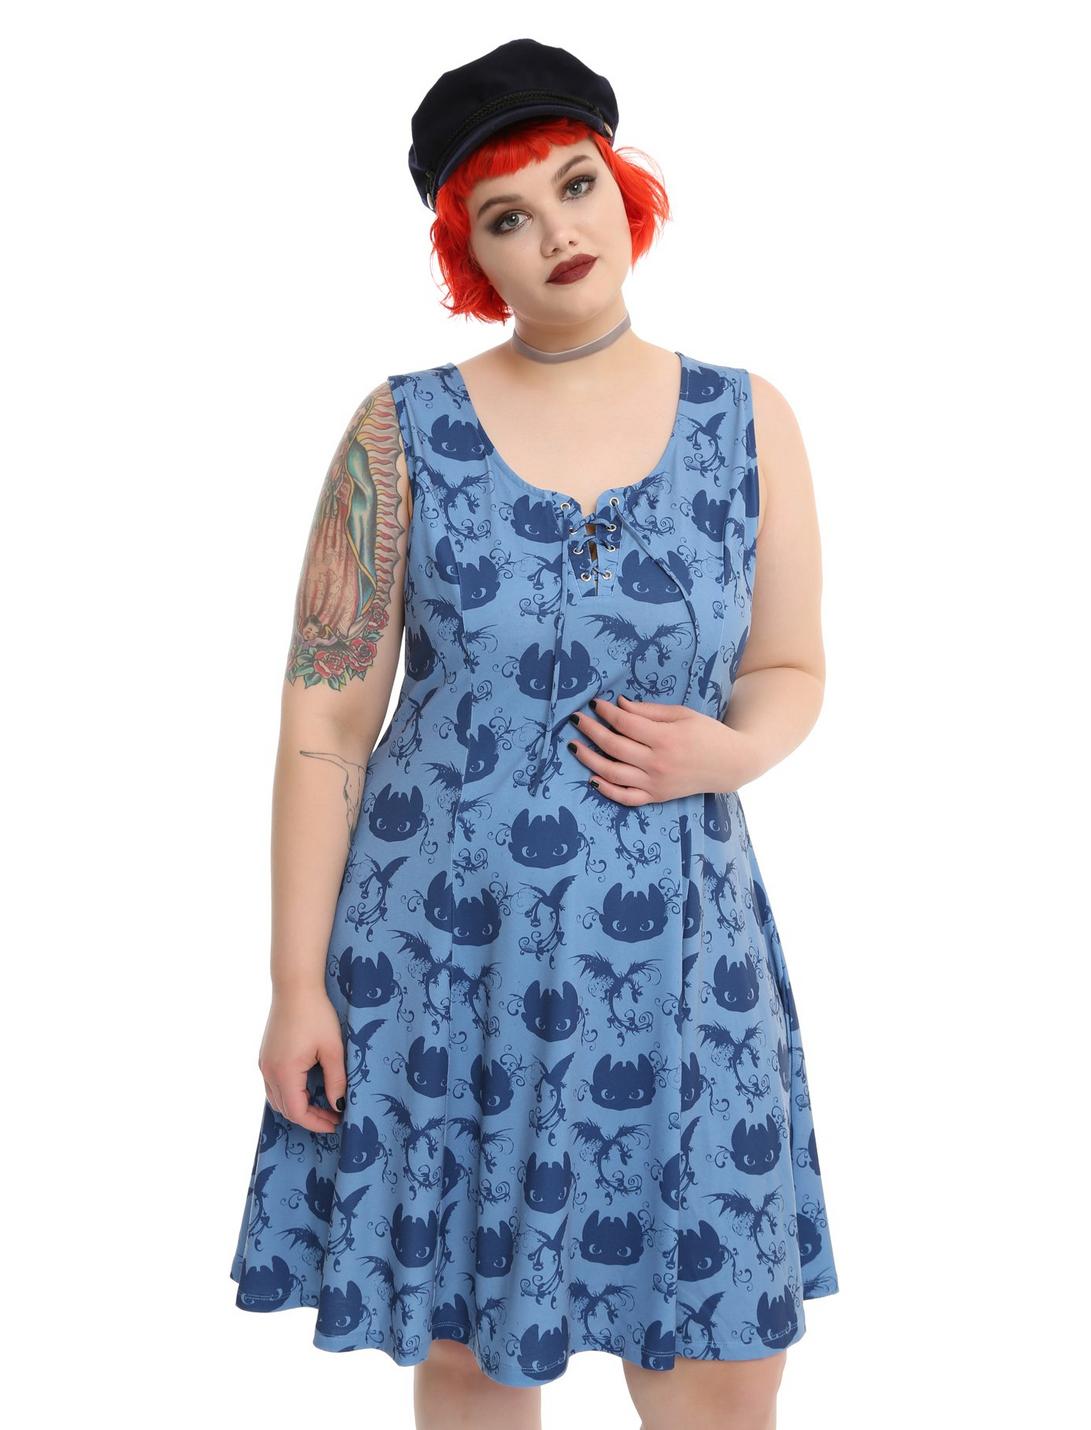 How To Train Your Dragon Toothless Print Dress Plus Size, BLUE, hi-res